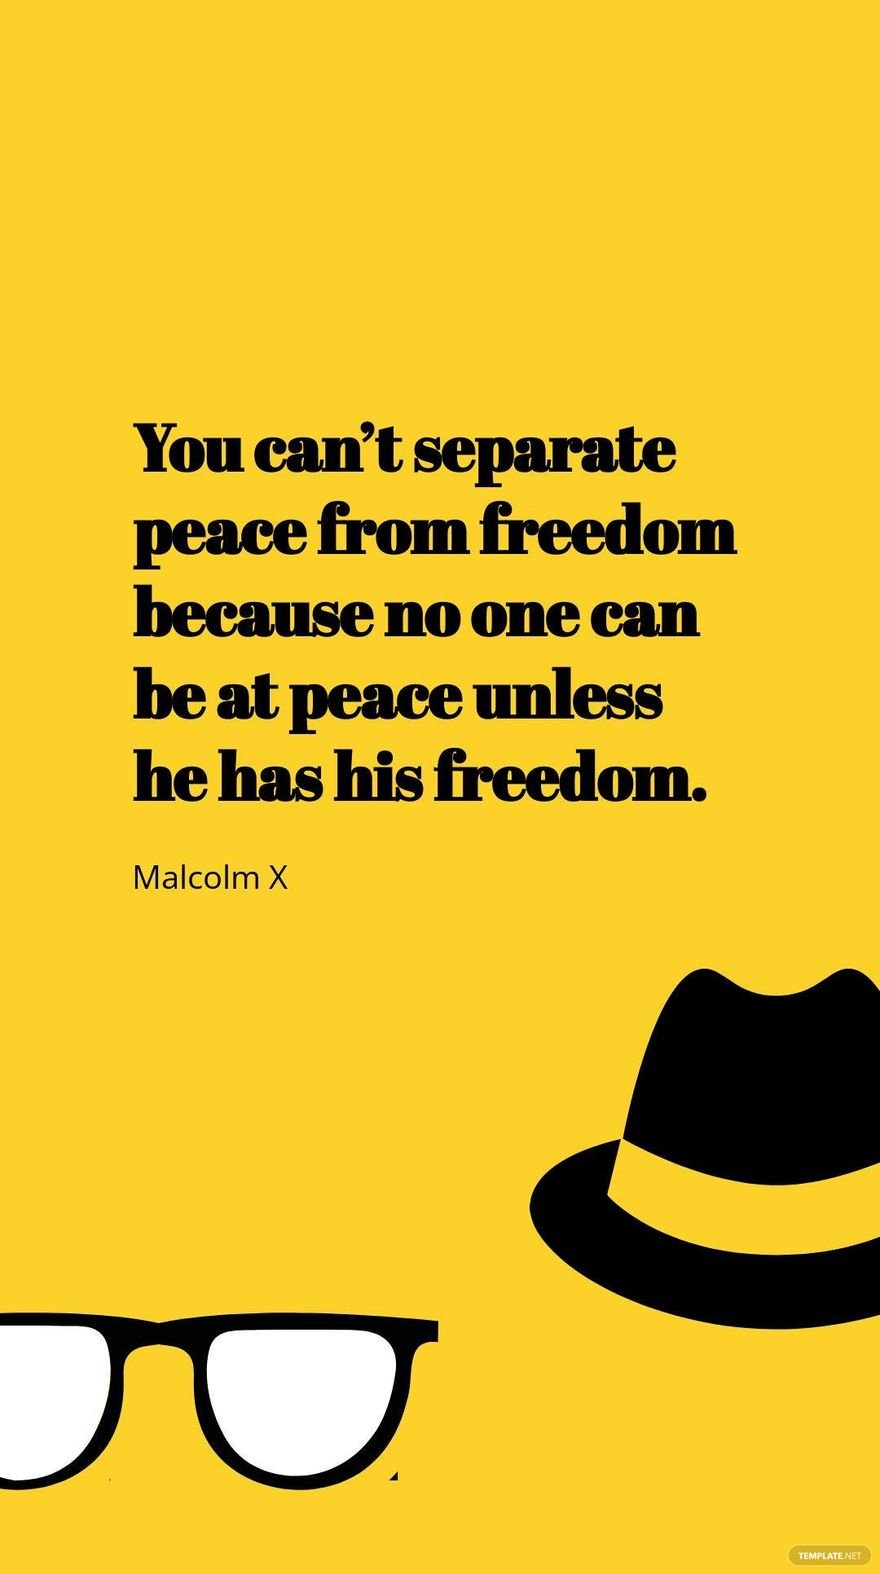 Malcolm X - You can’t separate peace from freedom because no one can be at peace unless he has his freedom.